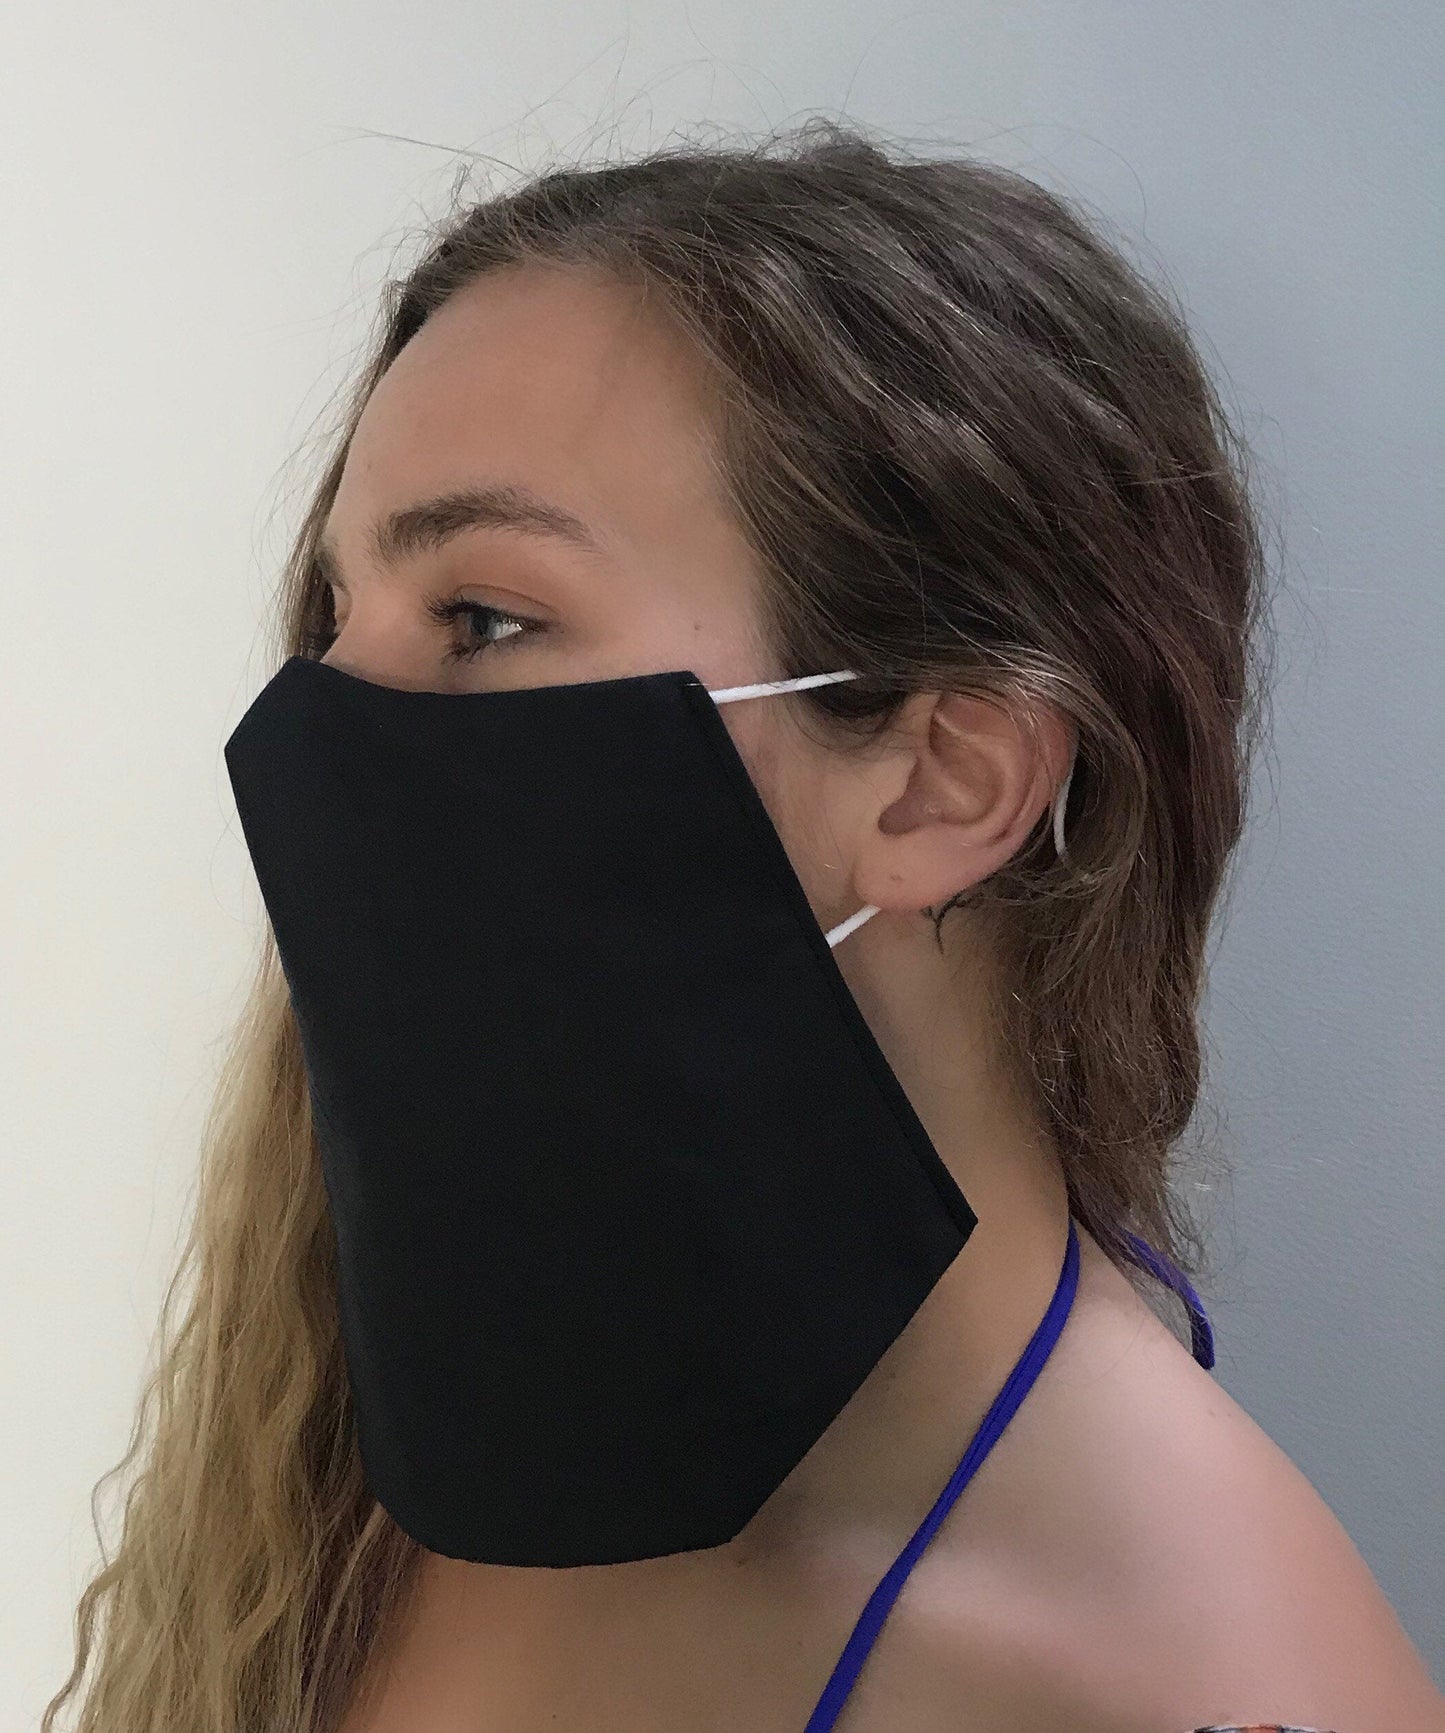 Open Bottom Veil-style face mask  Three layer protection, cool, comfortable and breathable. 20 Color Options. 100% Cotton. Washable. Made in USA